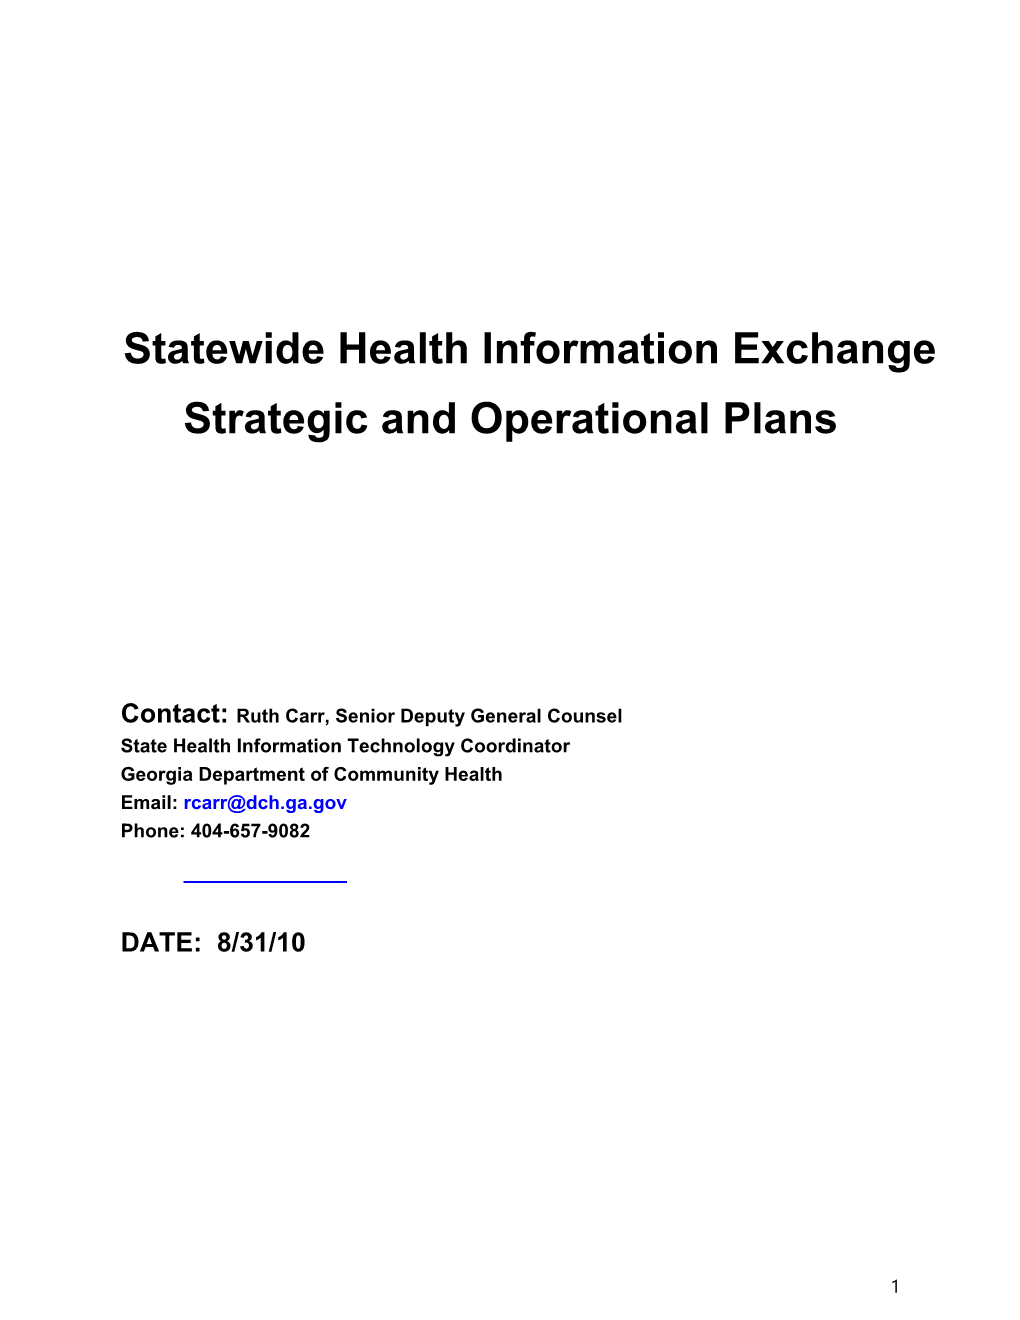 Statewide Health Information Exchange Strategic and Operational Plans